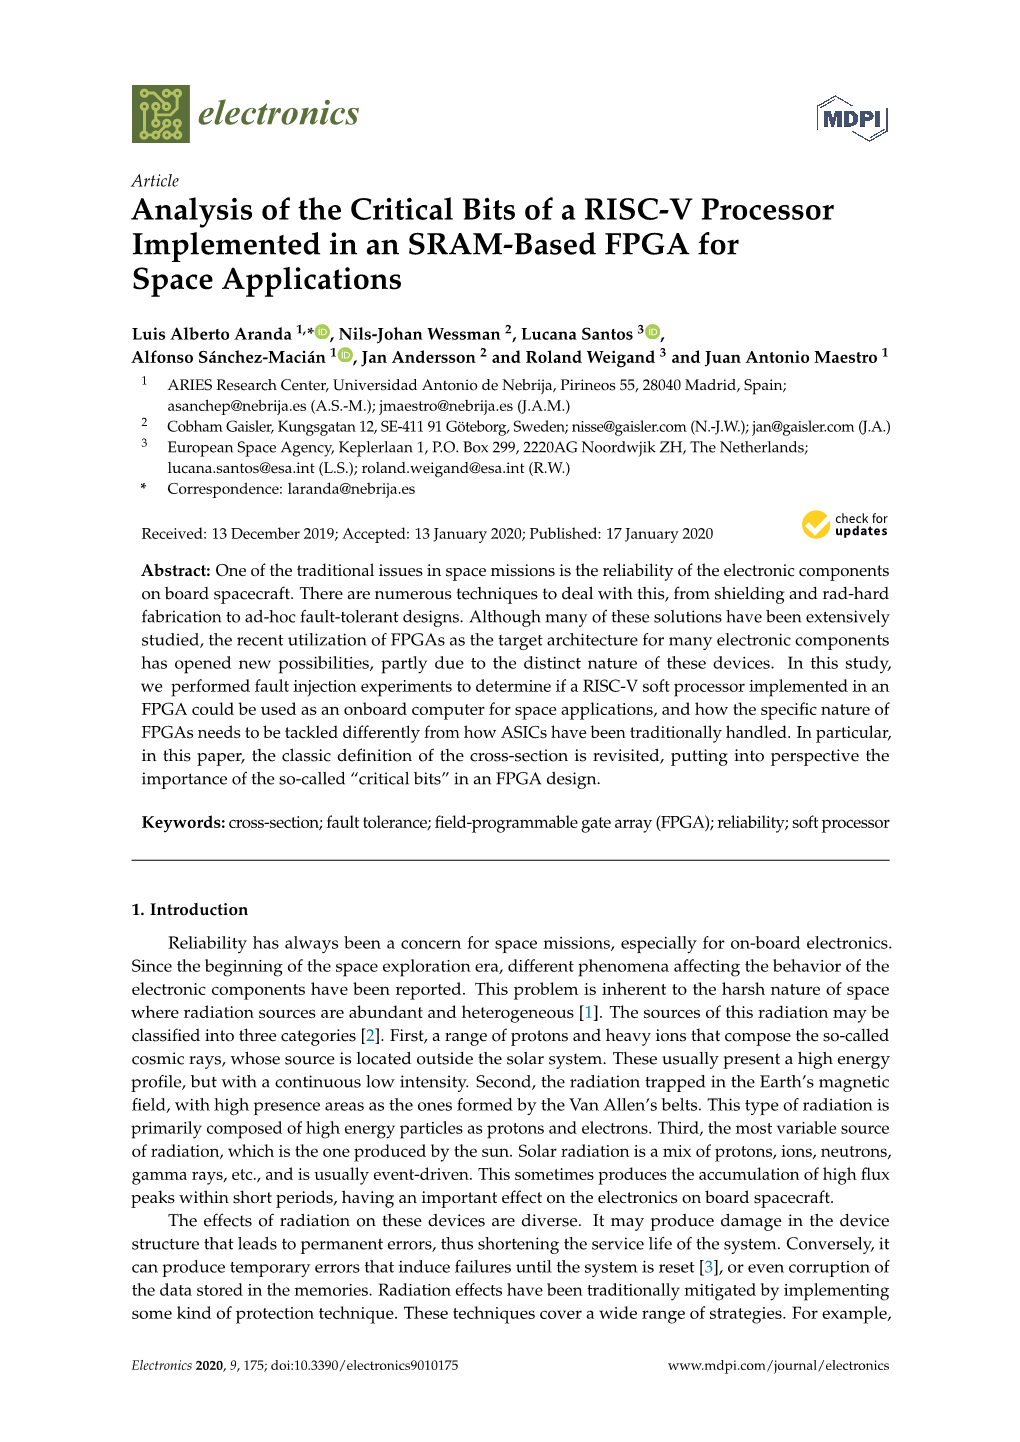 Analysis of the Critical Bits of a RISC-V Processor Implemented in an SRAM-Based FPGA for Space Applications